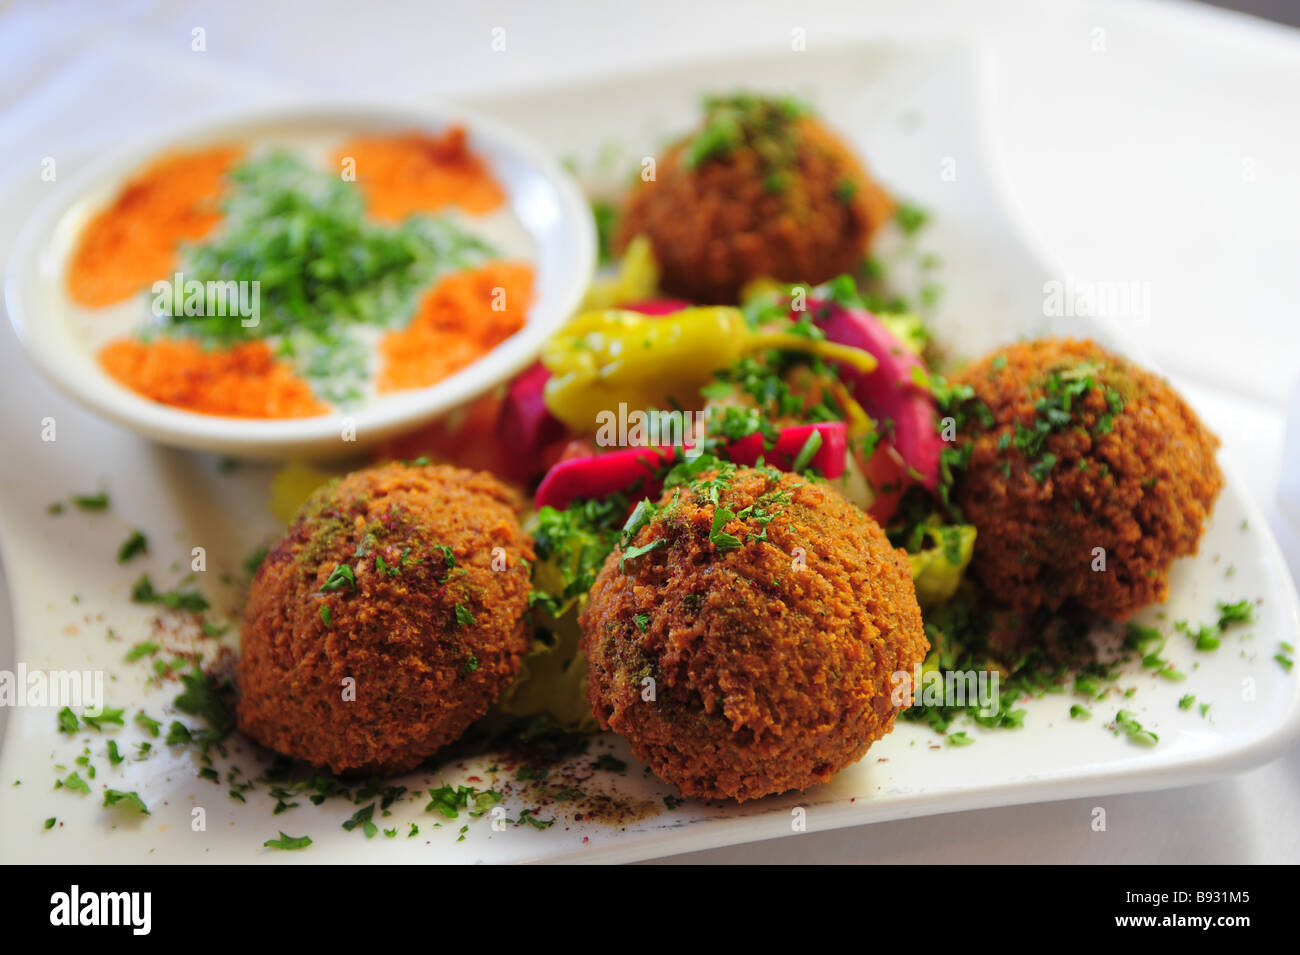 Falafel and tahini dipping sauce Middle East foods Stock Photo